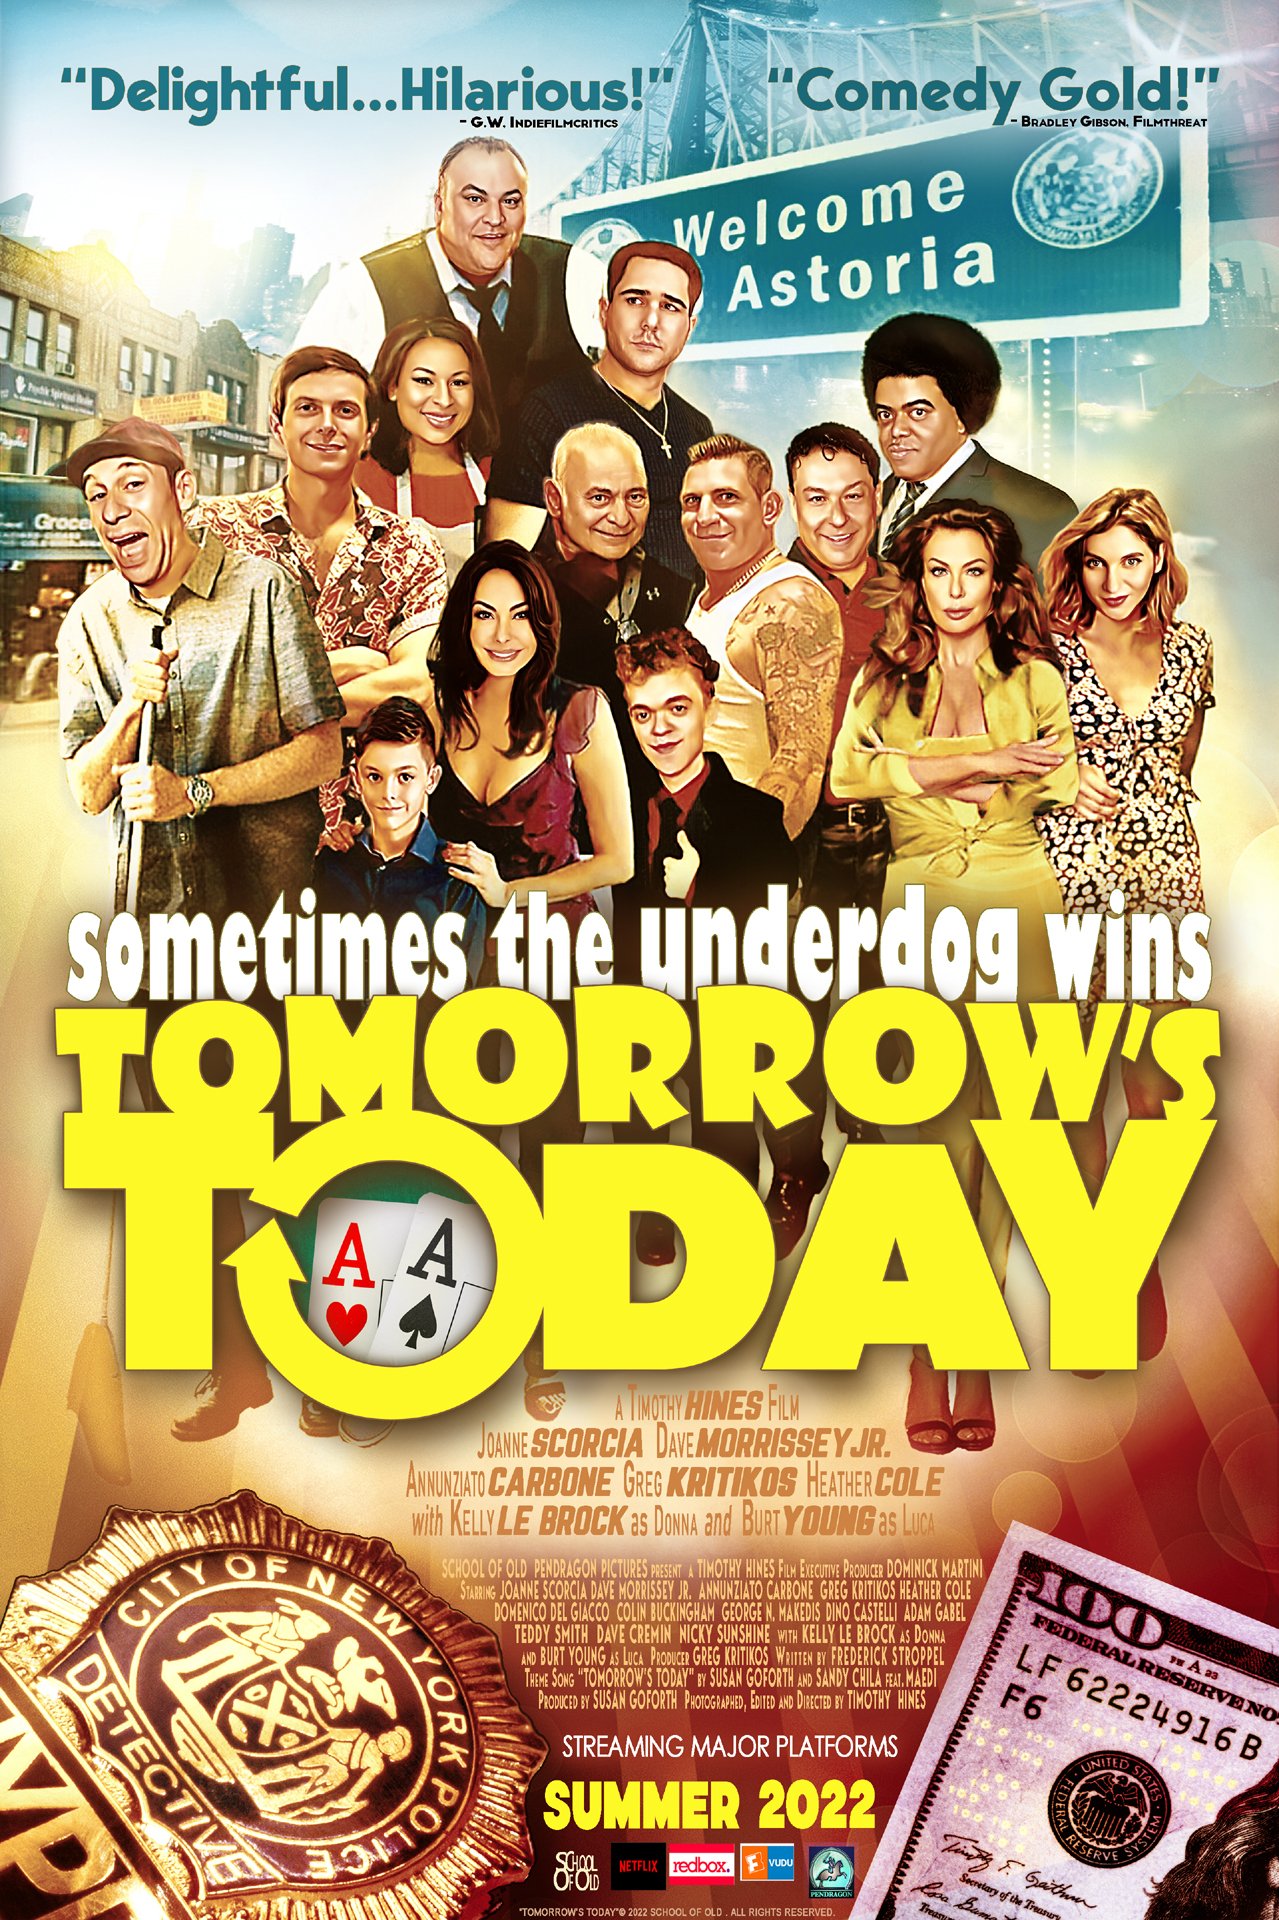 Pandemic Surviving Comedy With Lauded Cameos By Kelly Le Brock and Burt Young "TOMORROW'S TODAY" Now Among Top New Streaming Releases on Amazon Prime, Plex, AppleTV and More